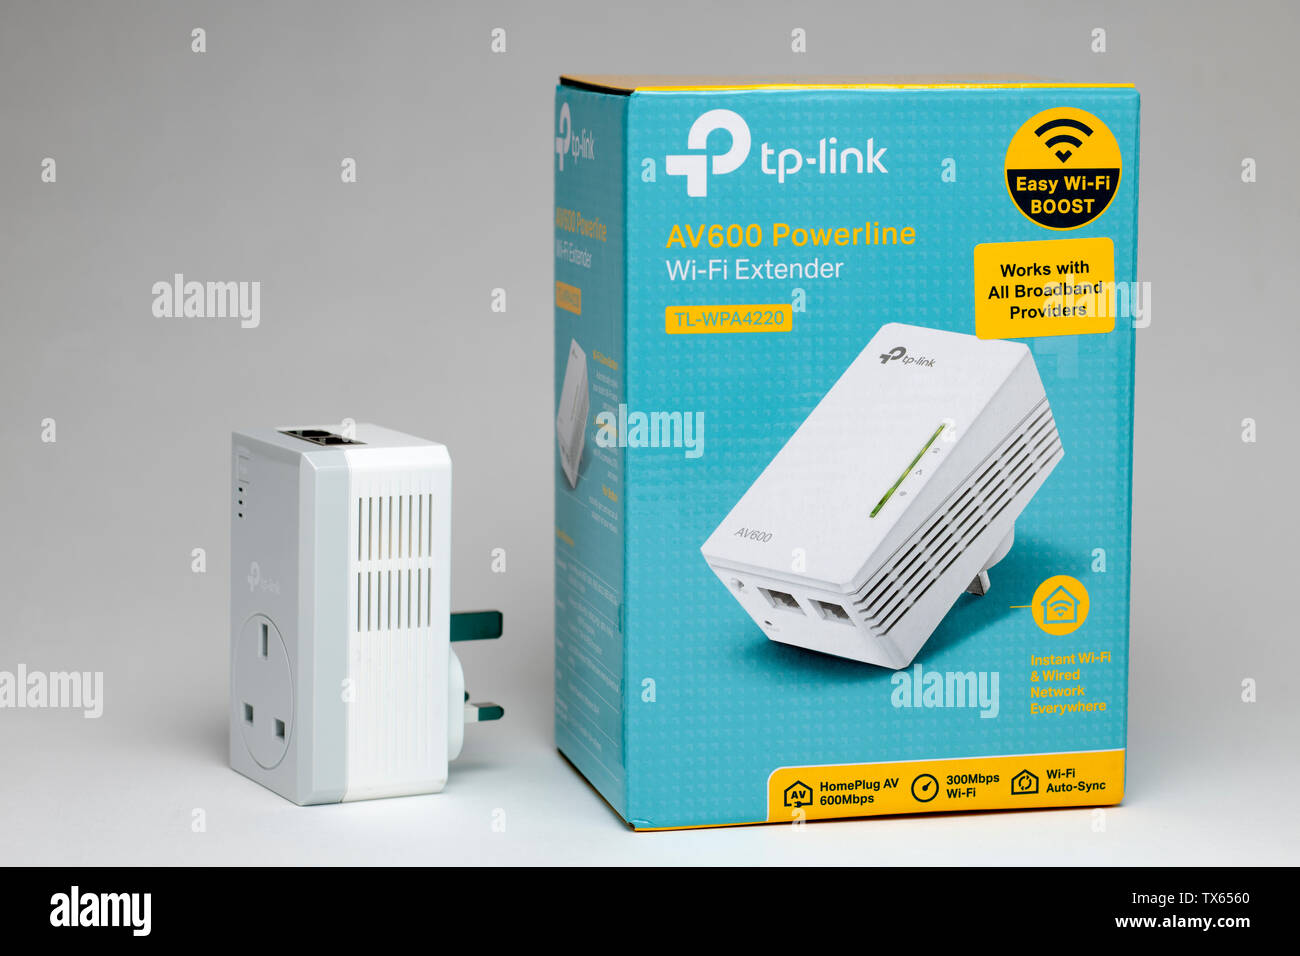 TP Link av600 powerline wifi extender and a tp link powerline adapter Stock  Photo - Alamy